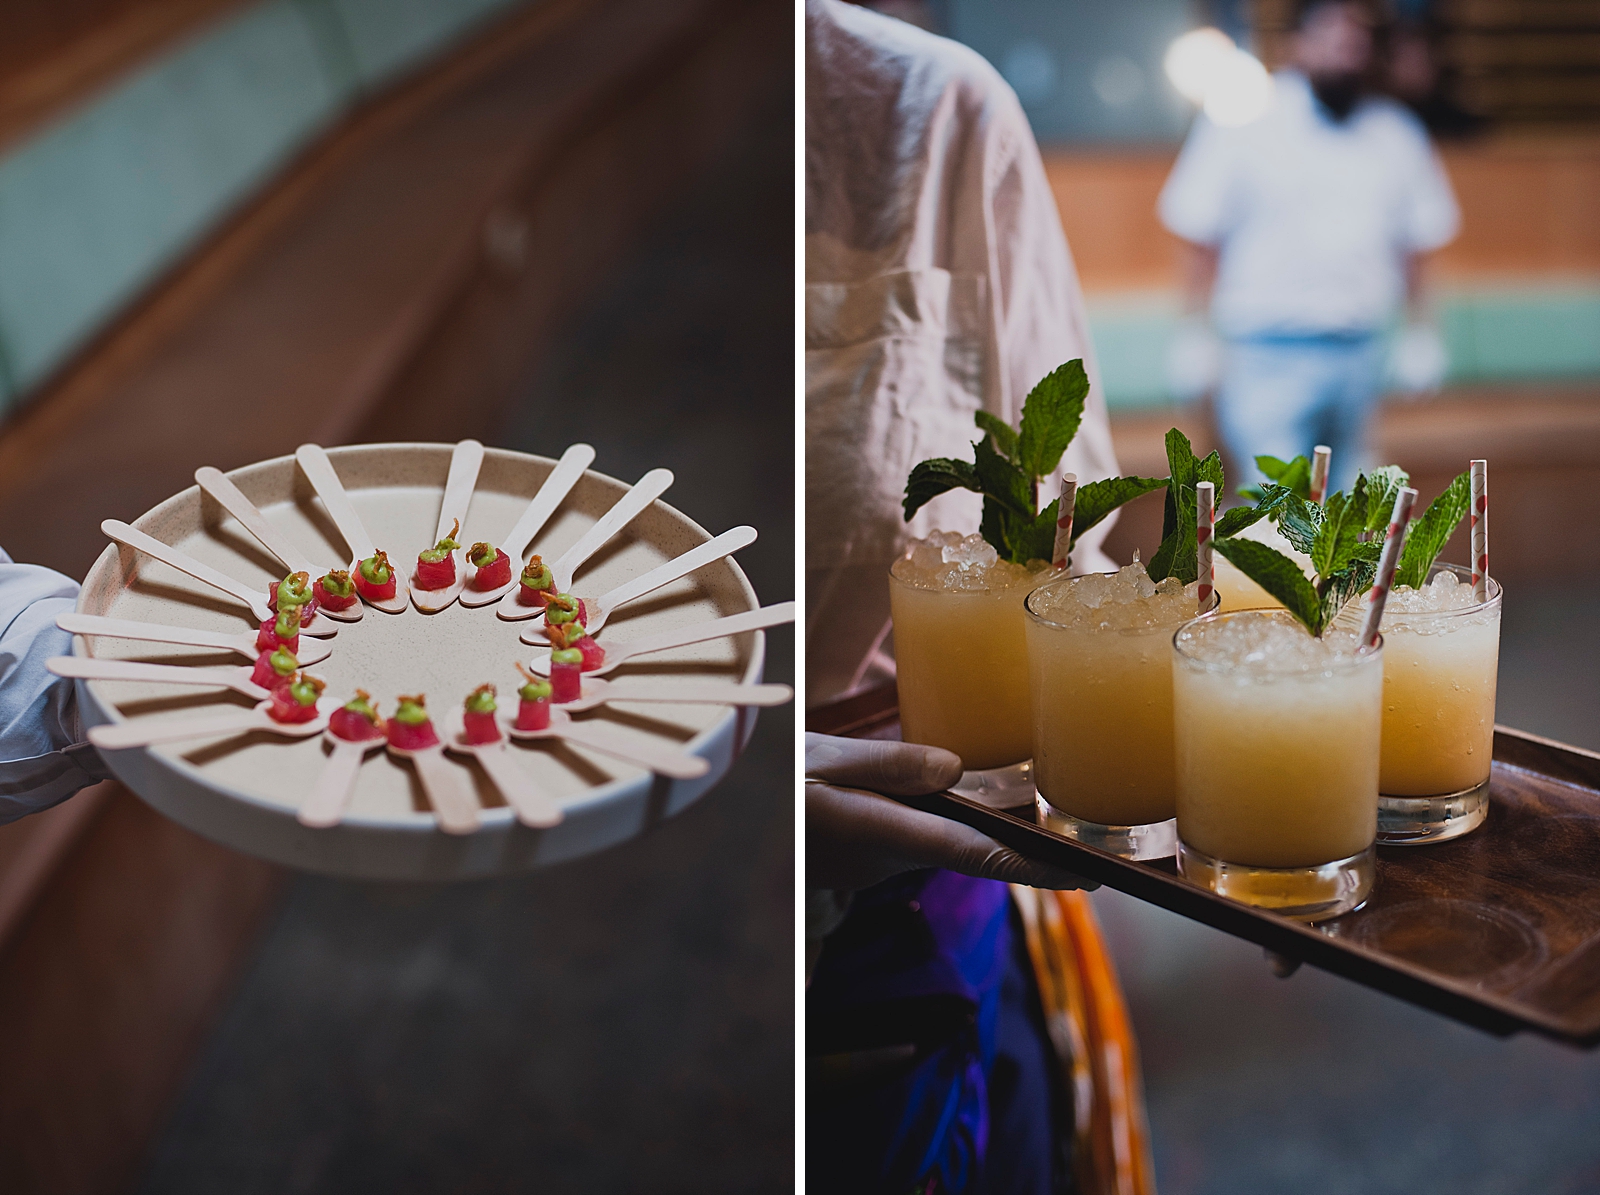 Left photo: Close up shot of hors d'oeuvres being served on a tray.
Right photo: Close up shot of mocktails being served on a tray.